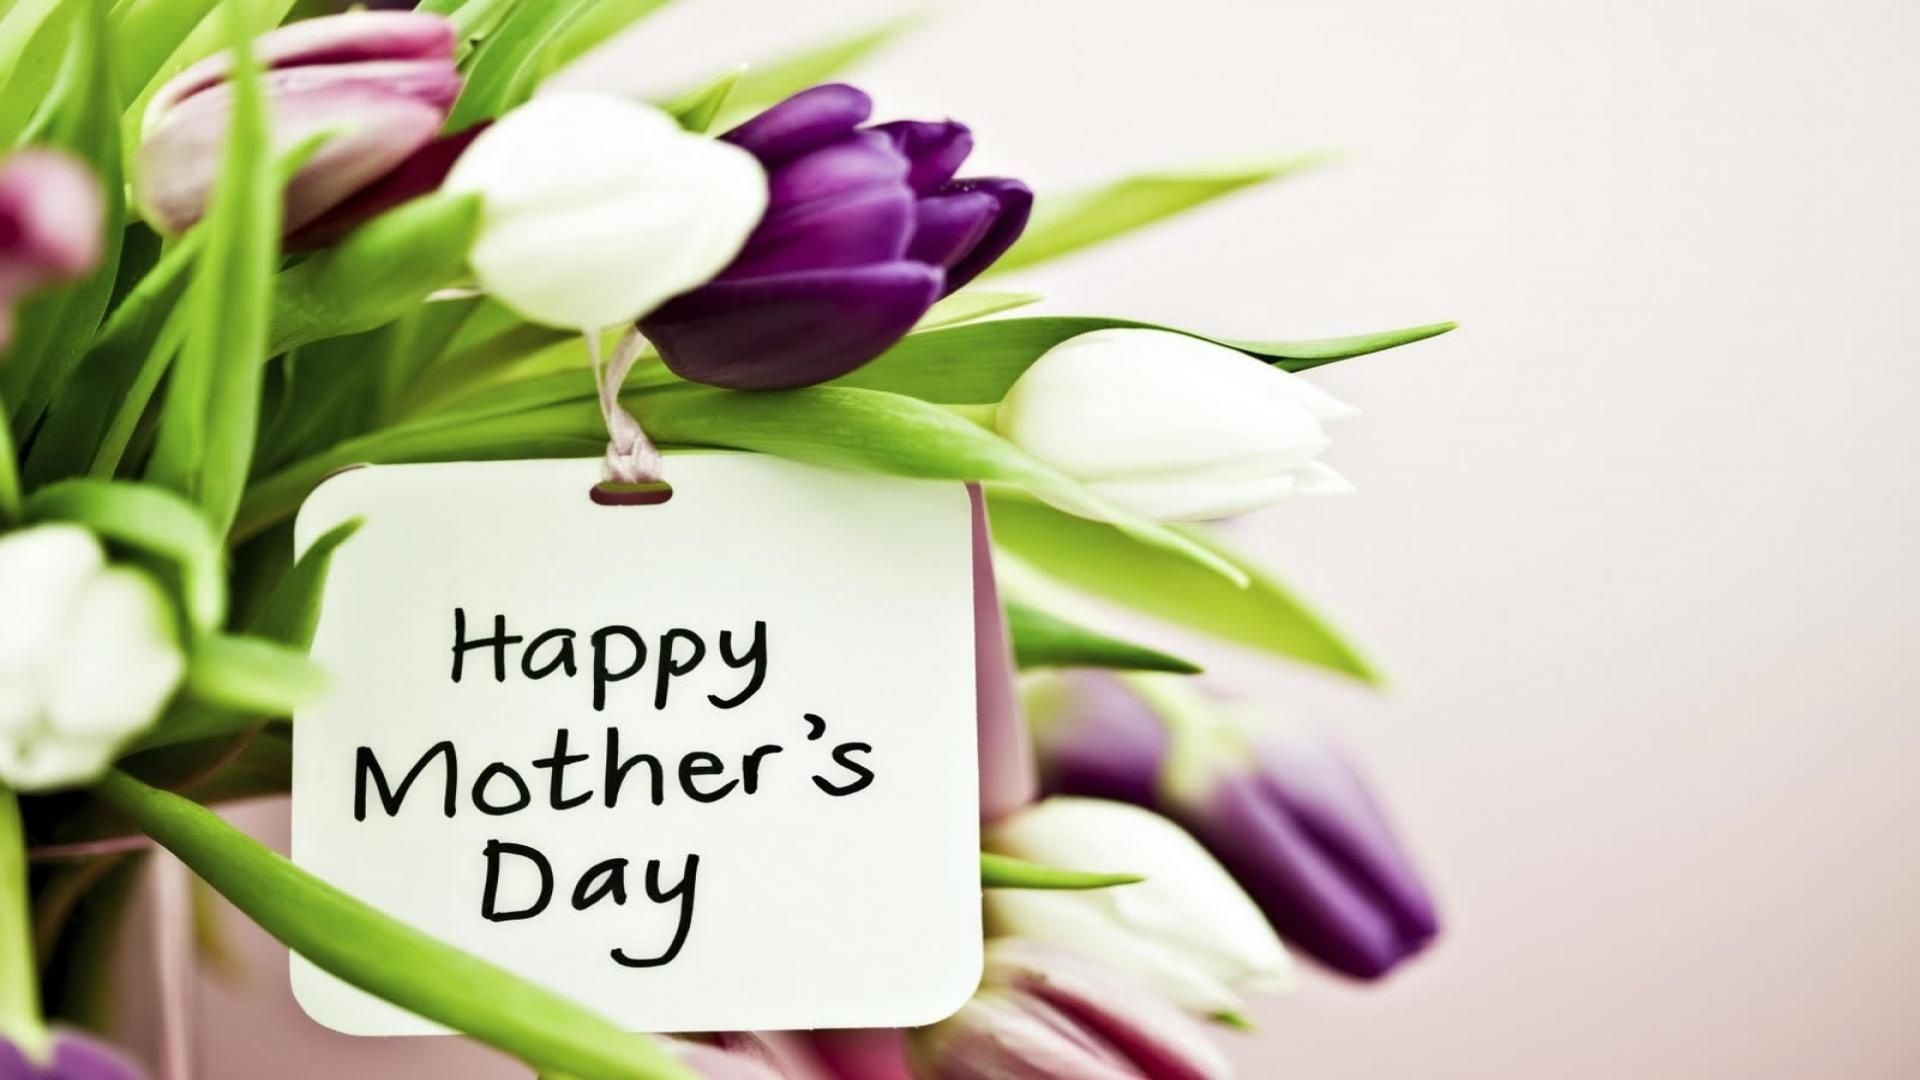 Happy Mothers Day Wallpaper Free